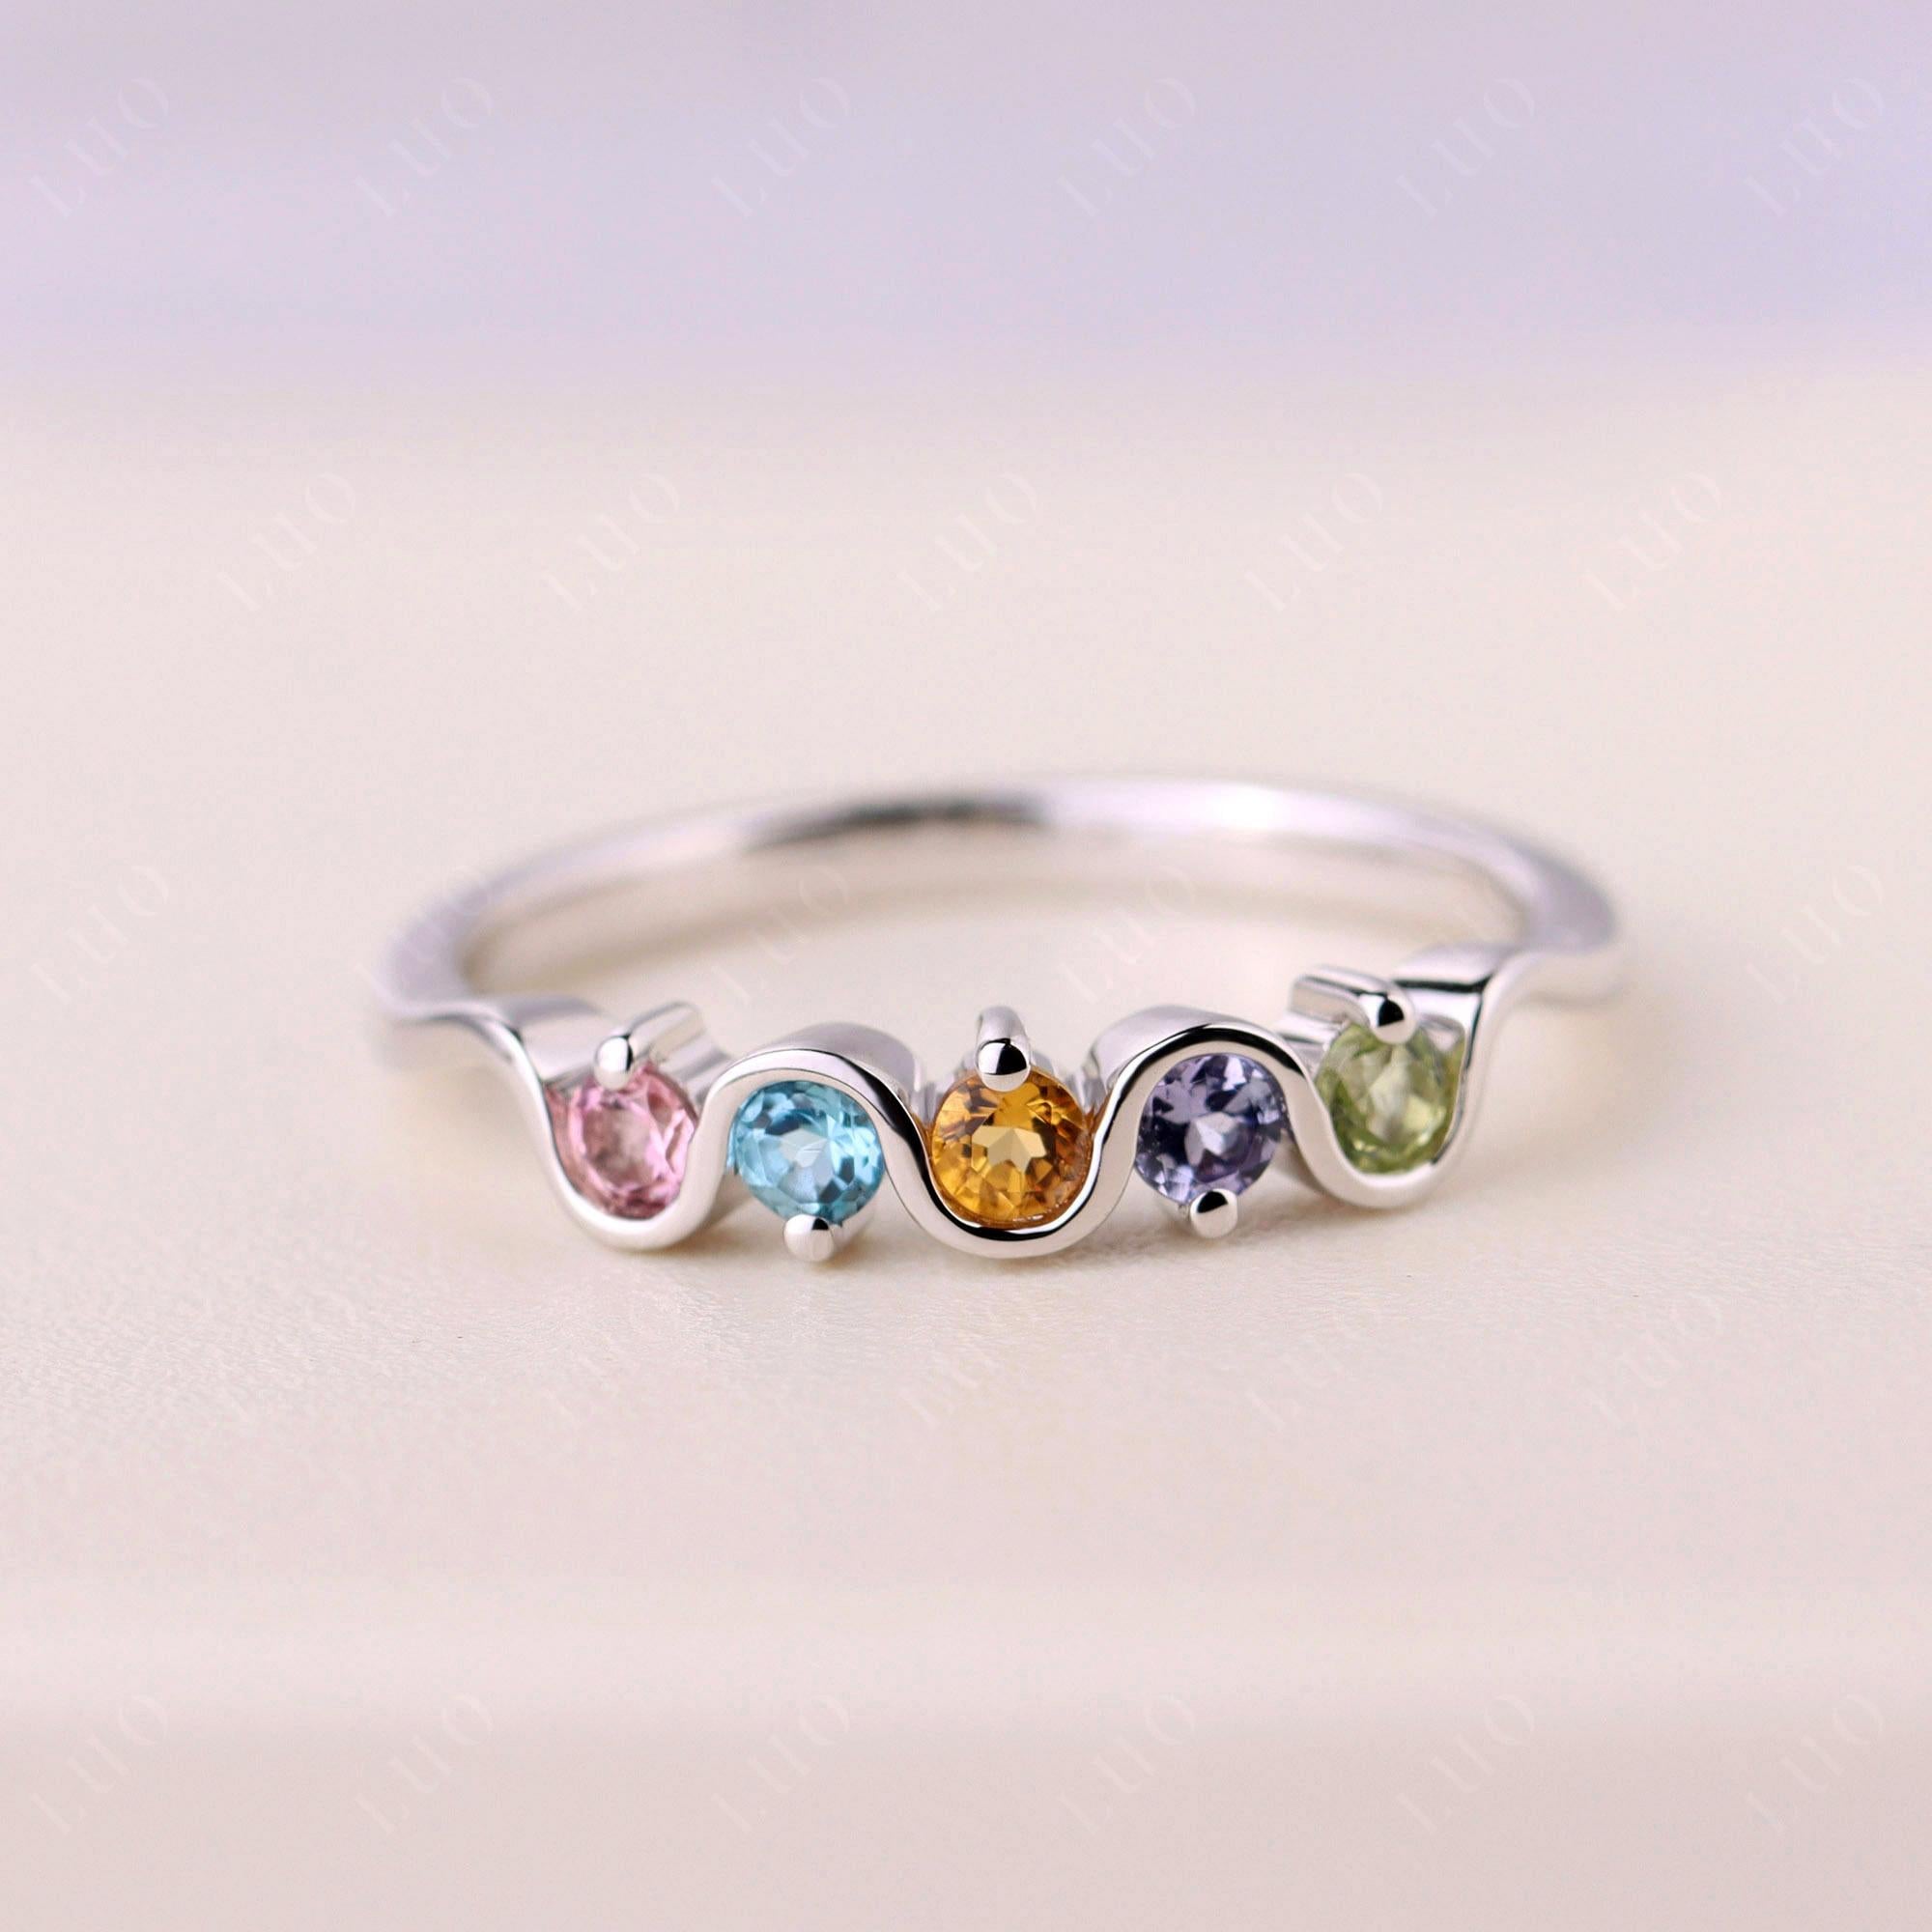 Citrine and Peridot and Swiss Blue Topaz and Tanzanite and Tourmaline Band Ring - LUO Jewelry